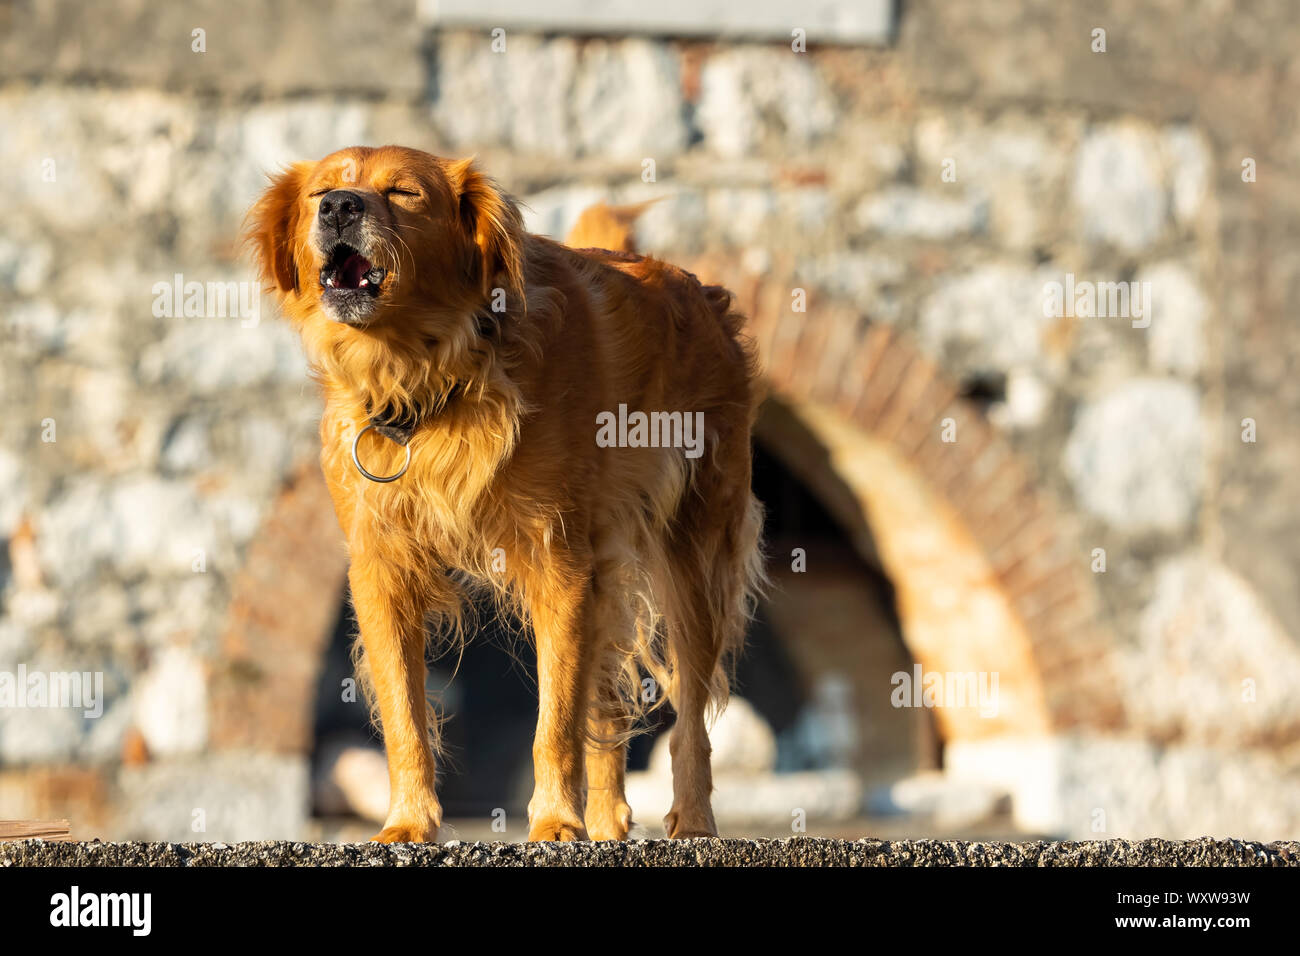 The dog is standing in front of the building wall and barking Stock Photo